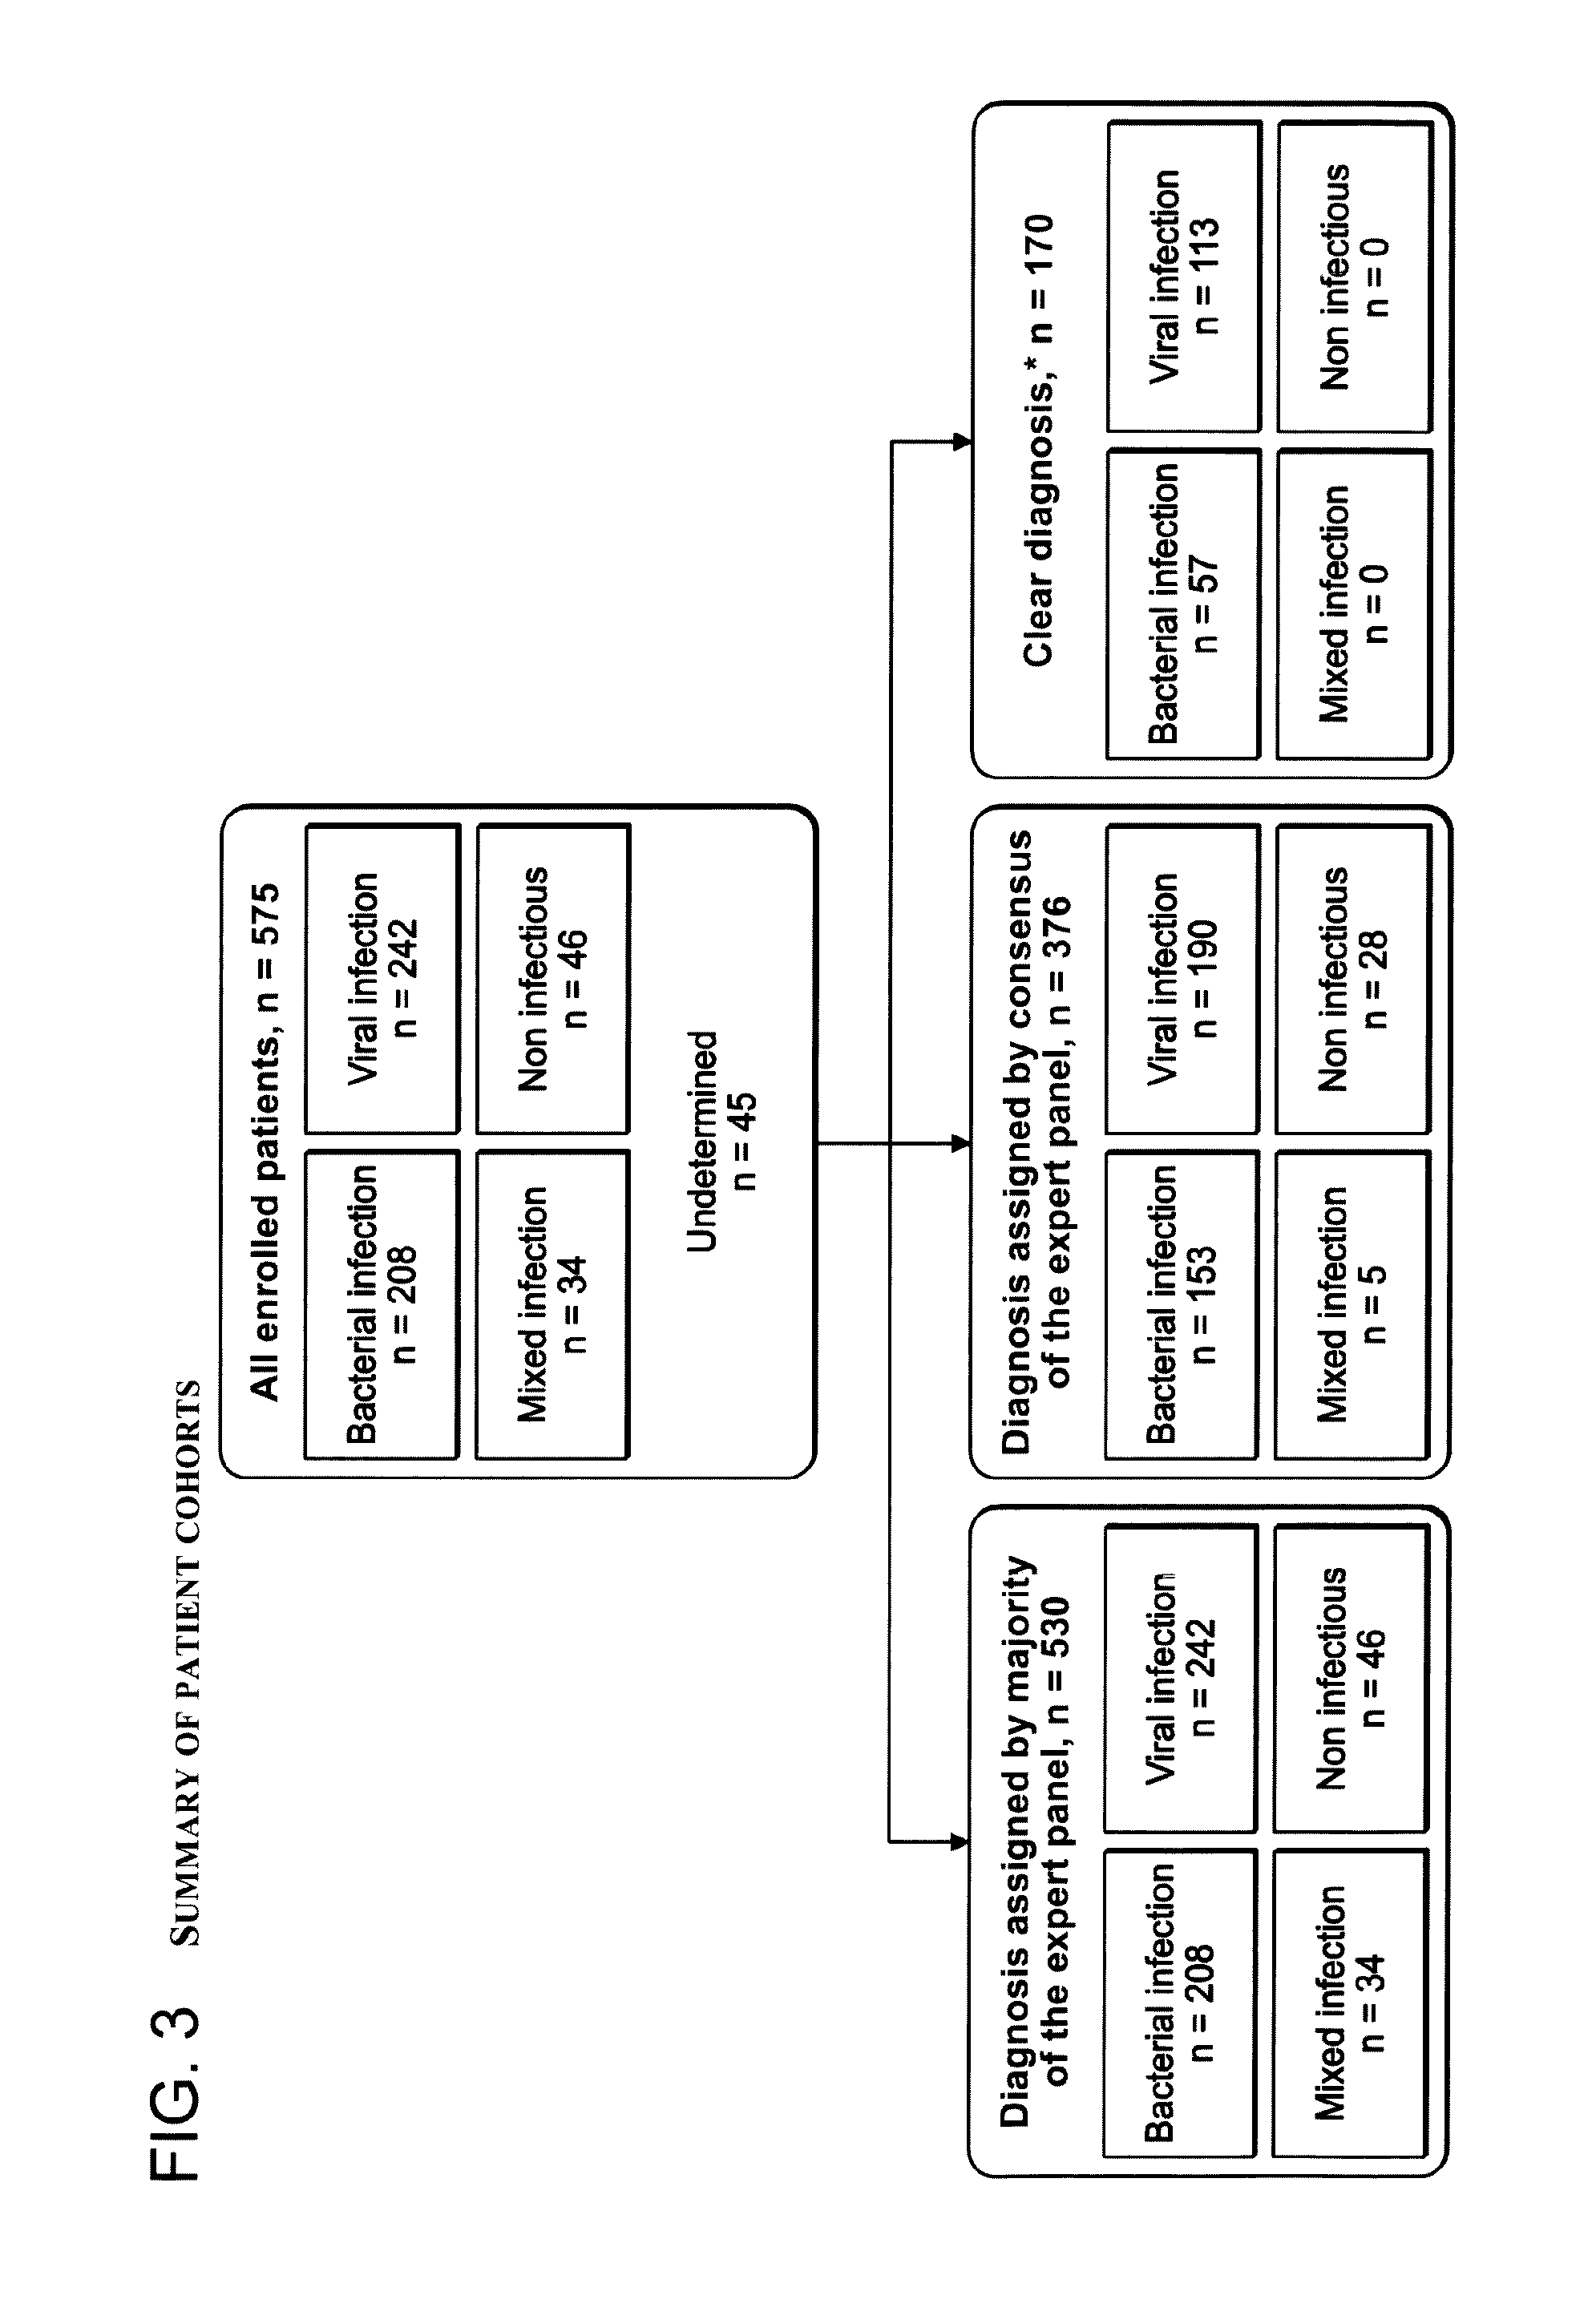 Signatures and determinants for diagnosing infections and methods of use thereof